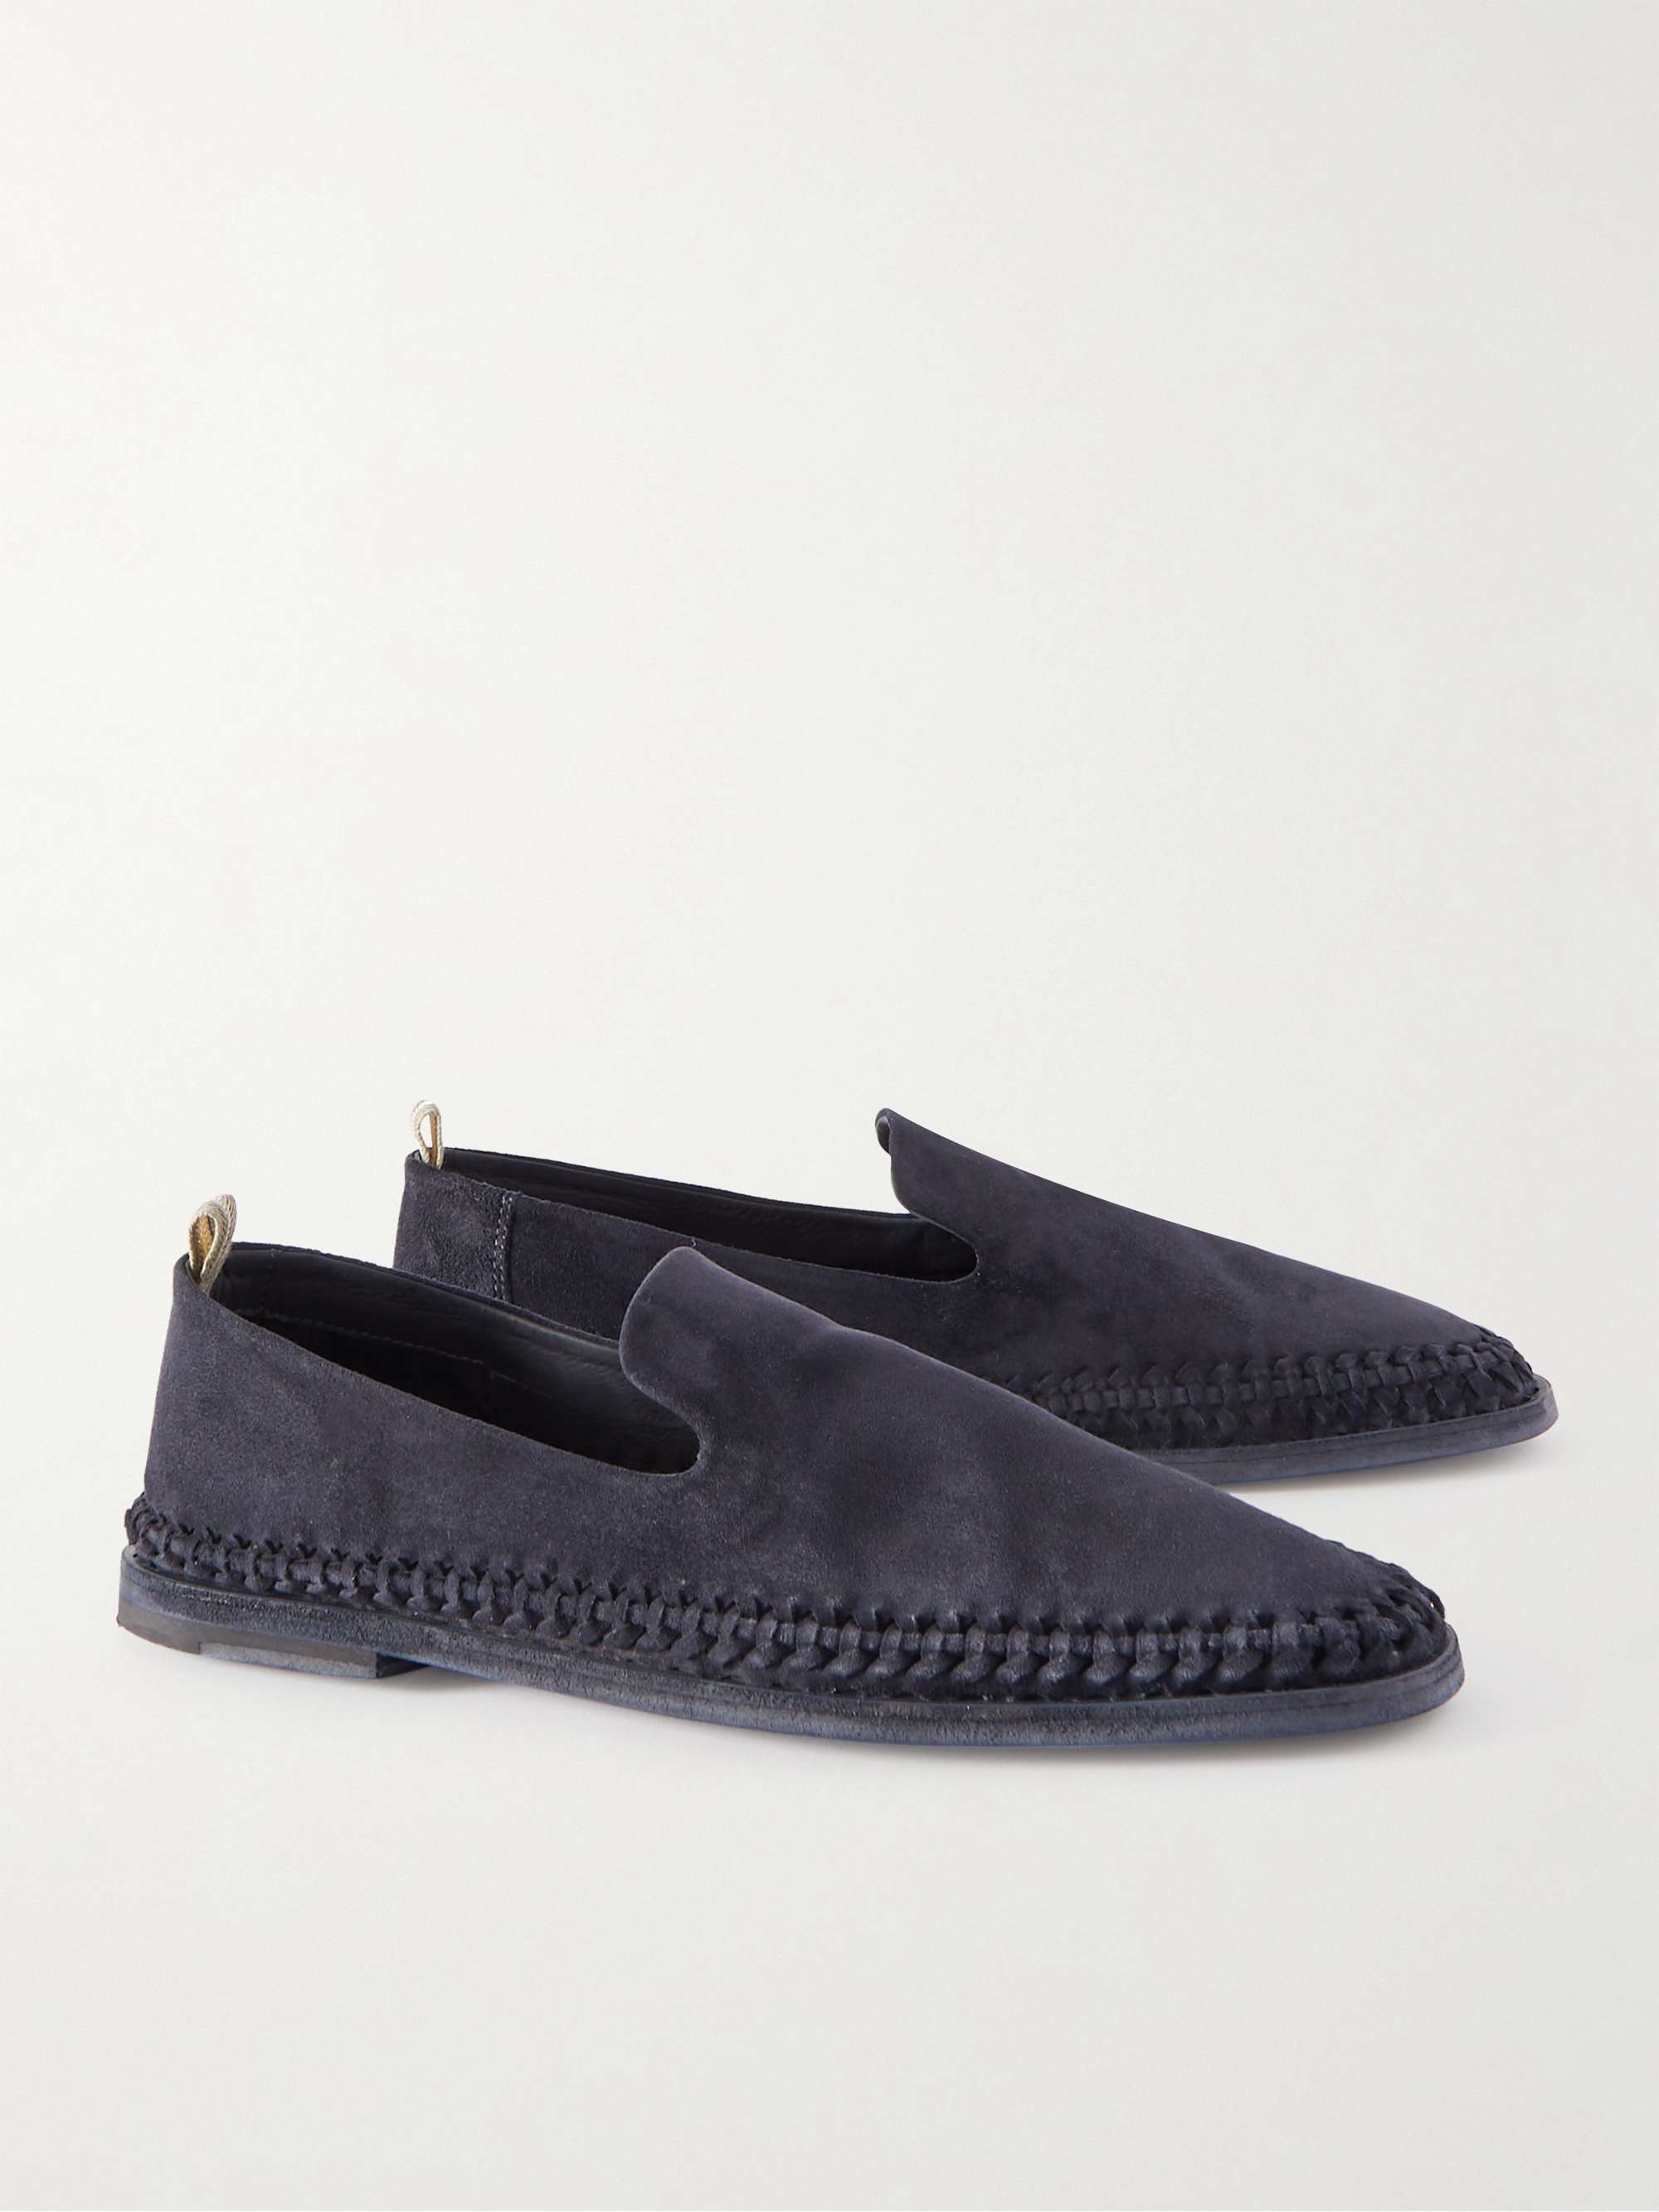 OFFICINE CREATIVE Miles Braided Suede Loafers